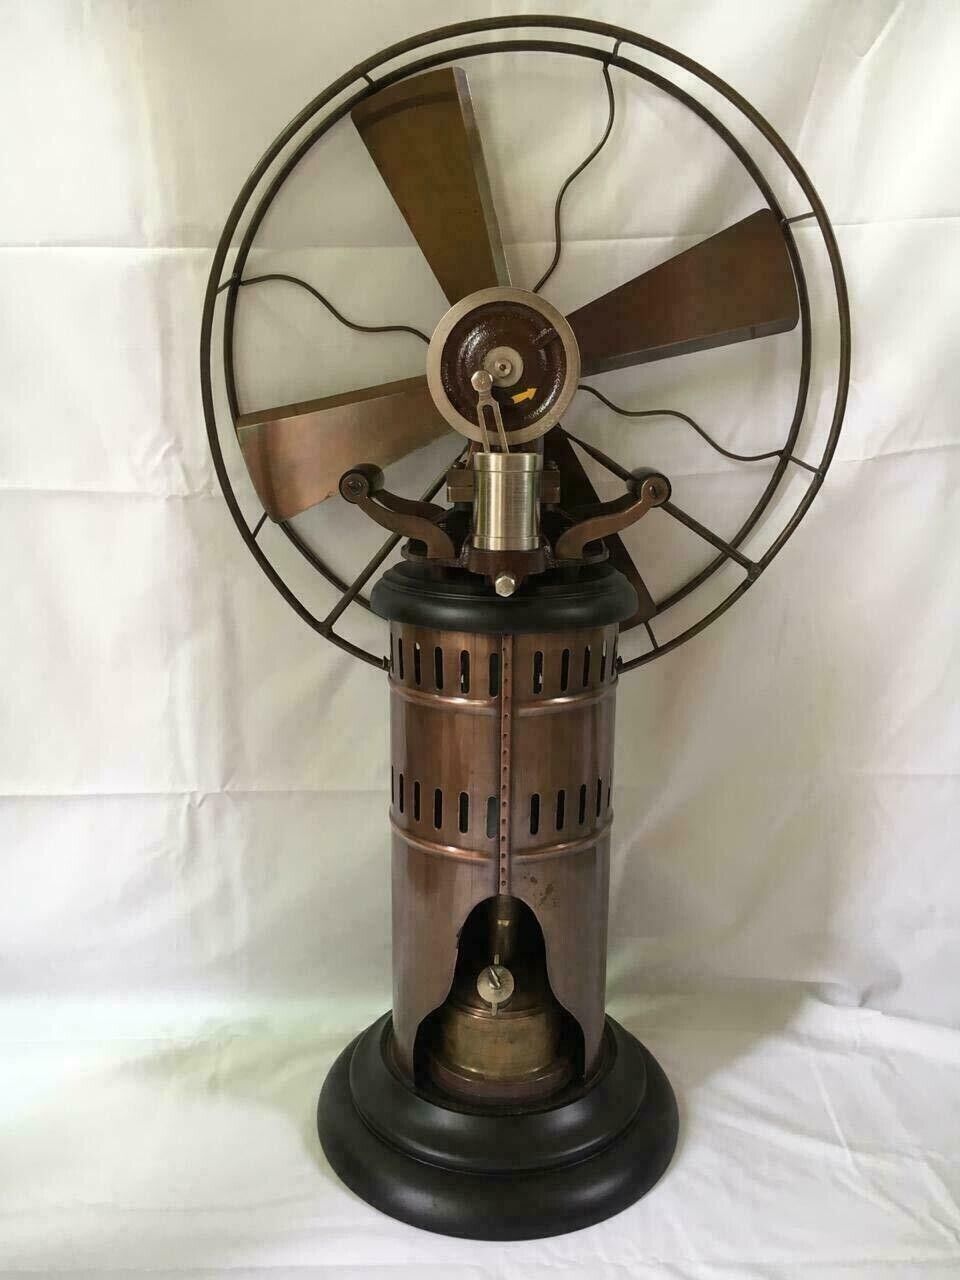 Vintage Steam Operated Kerosene oil Fan Working Fully operat Collectibles Museum